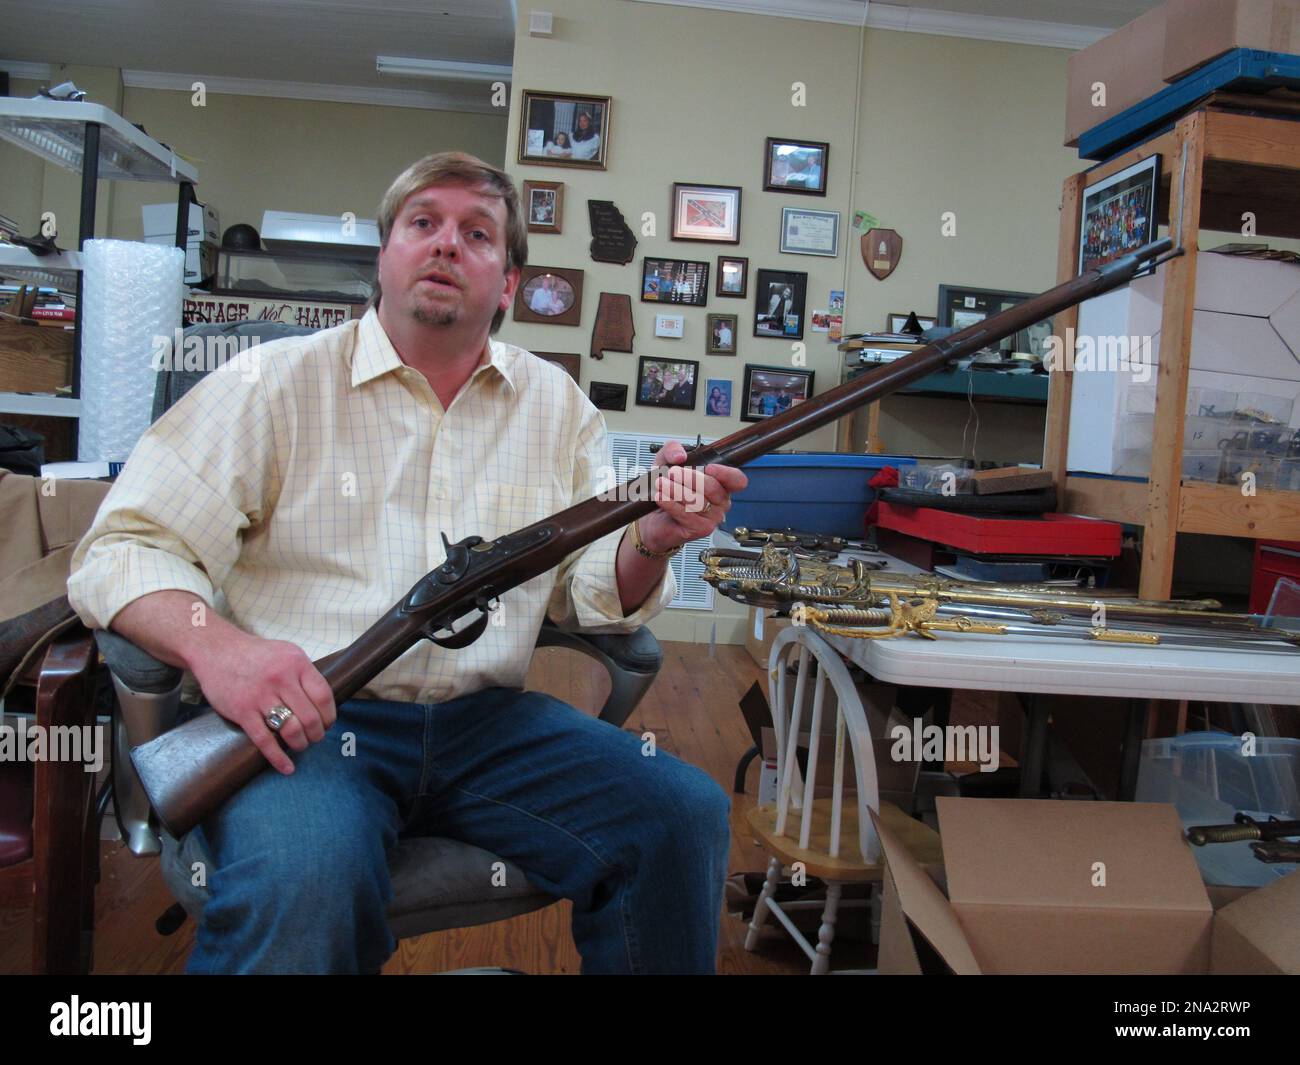 in-a-wednesday-march-21-2012-photo-civil-war-relics-collector-rafael-eledge-poses-with-a-musket-made-in-1831-in-savannah-tenn-eledge-says-artifacts-connect-him-with-meaningful-events-and-people-of-the-past-ap-photoadrian-sainz-2NA2RWP.jpg